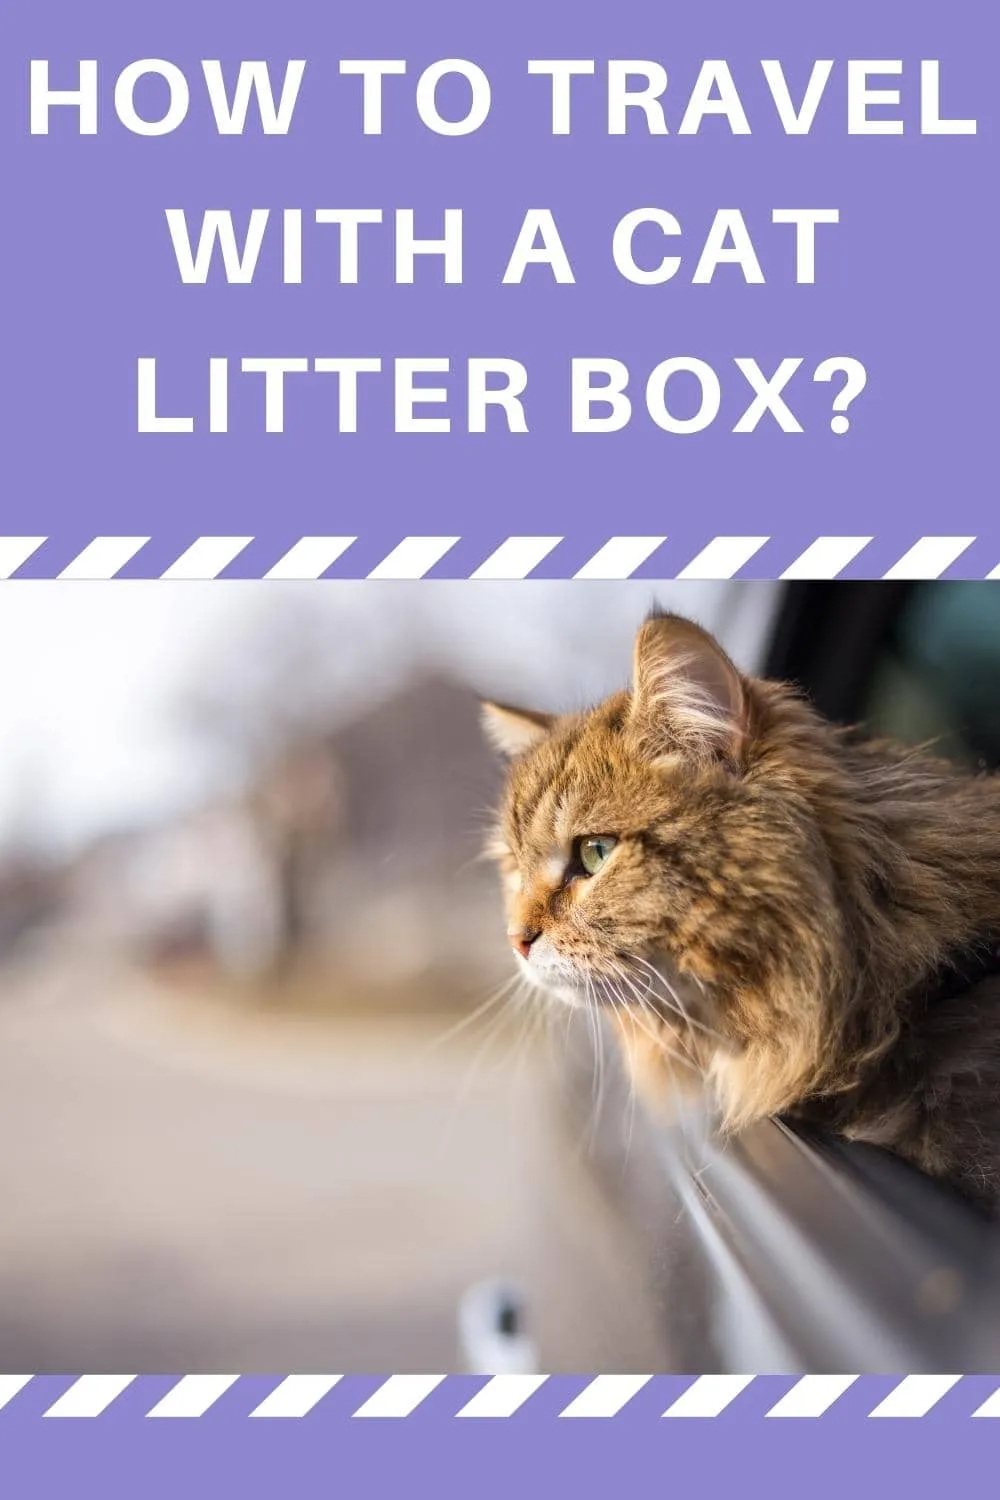 How to Travel with a Cat Litter Box